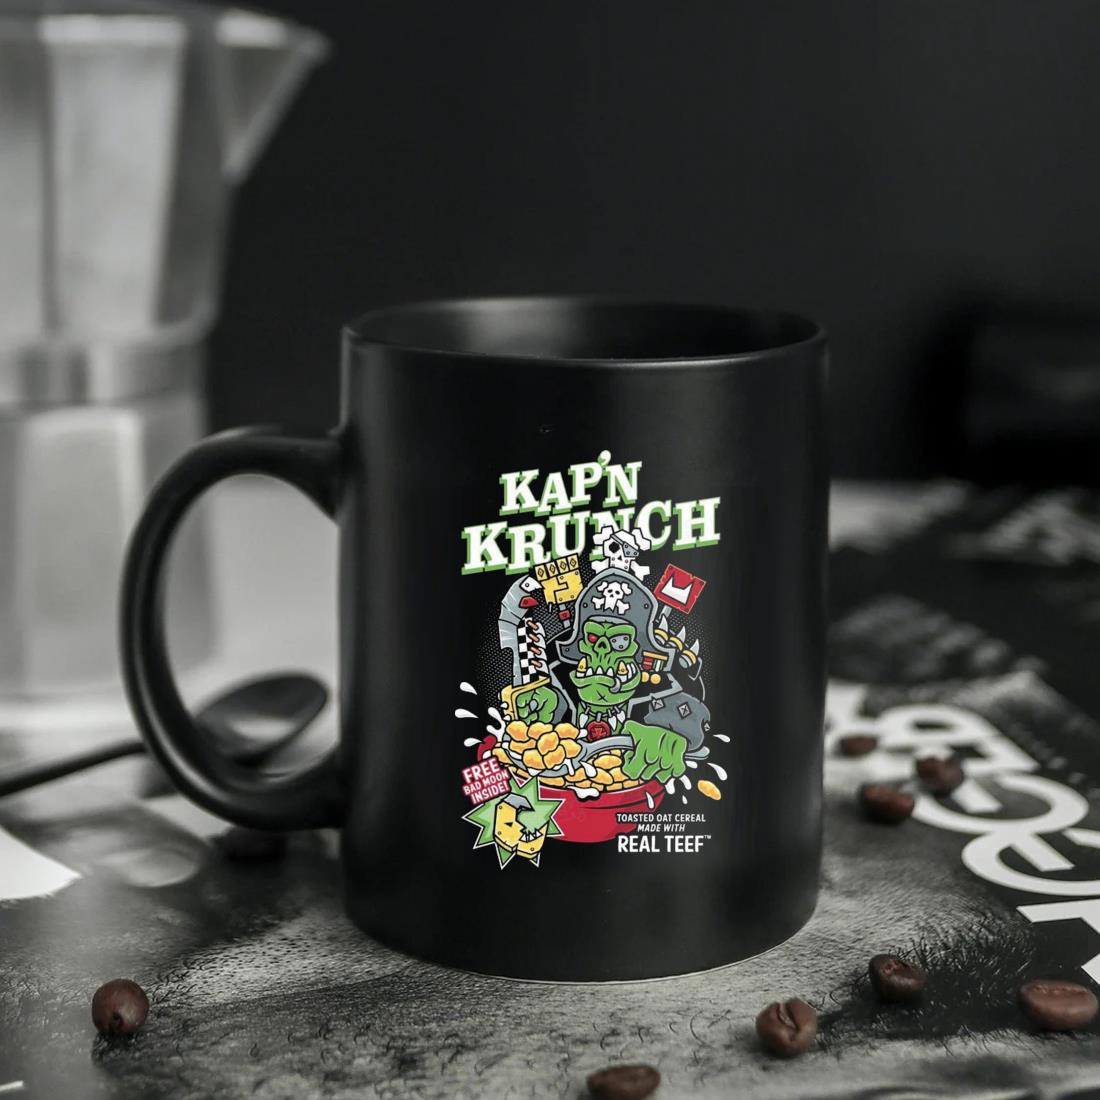 Kap'n Krunch Toasted Oat Cereal Made With Real Teef Mug ten